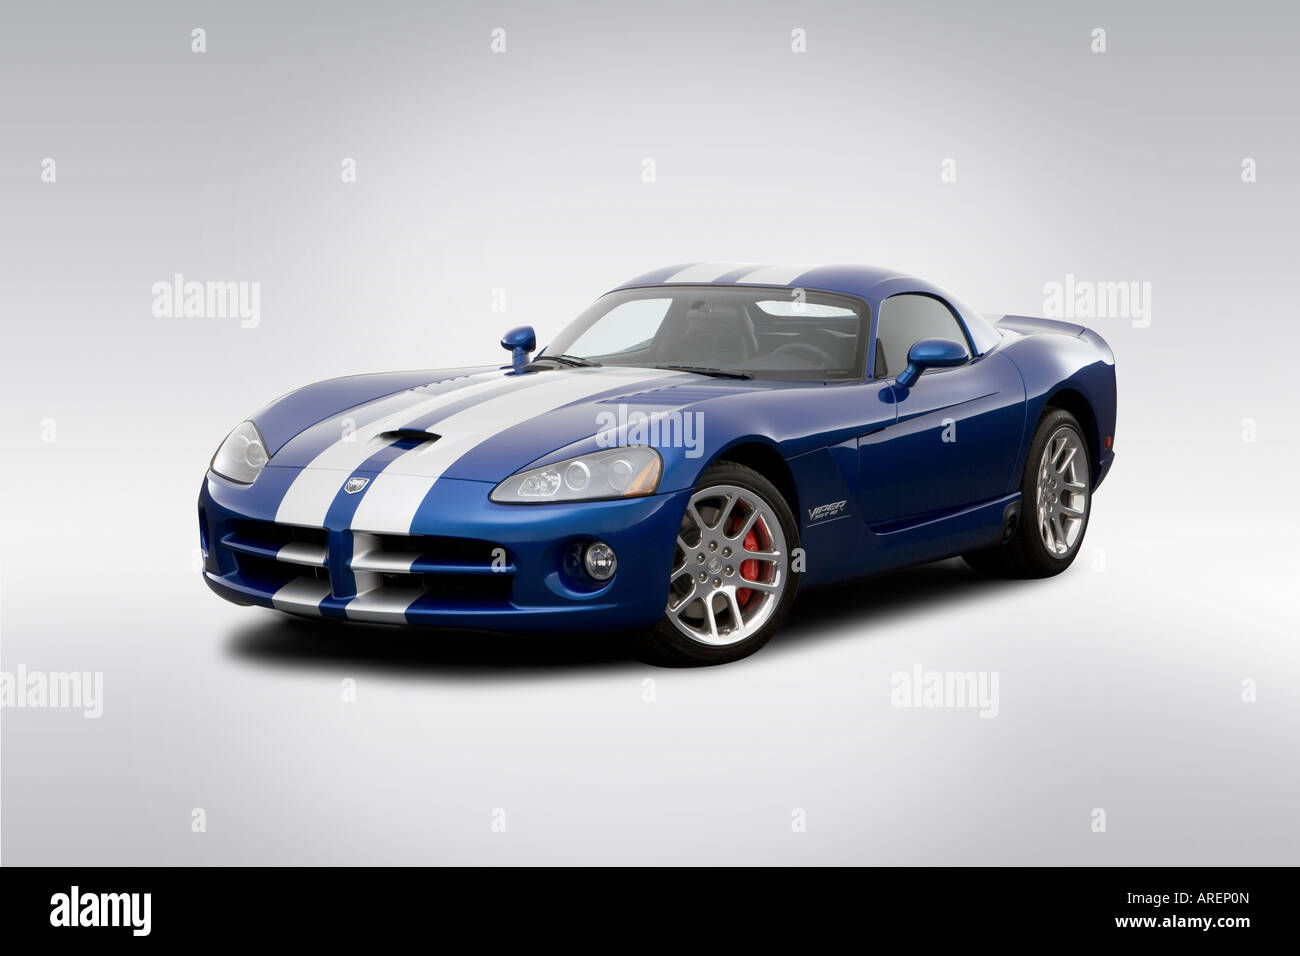 2006 Dodge Viper SRT-10 Coupe in Blue - Front angle view Stock Photo